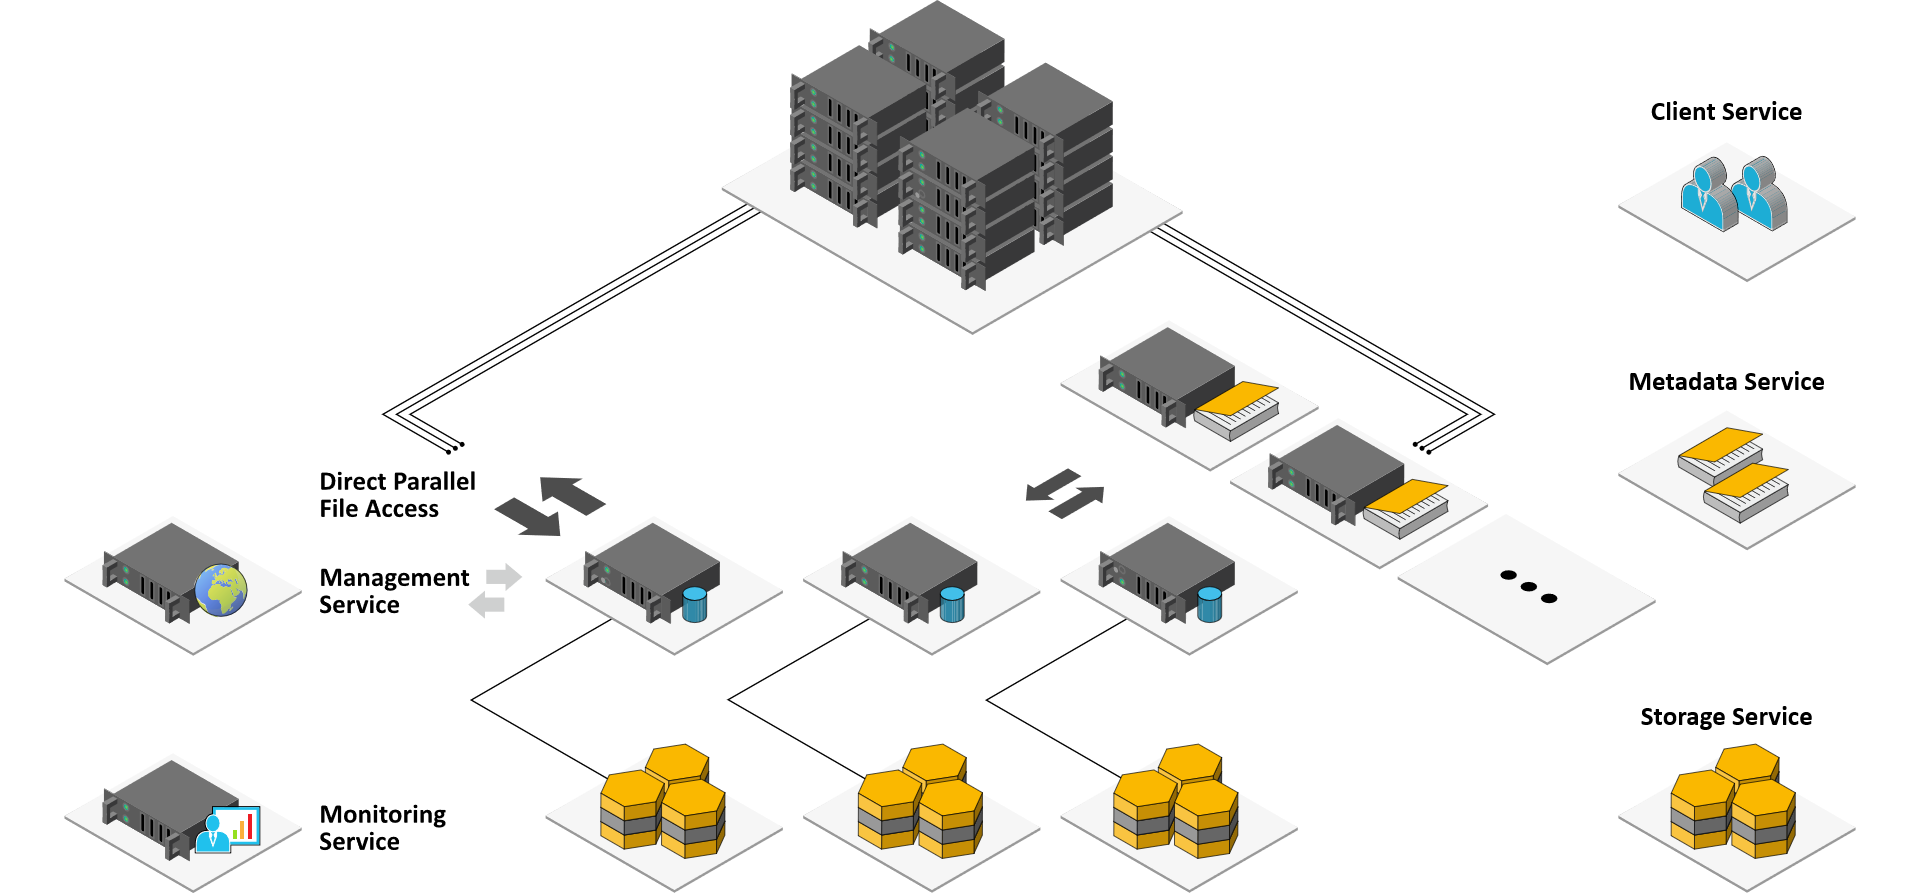 System Architecture Overview: Parallelism and Scale-Out